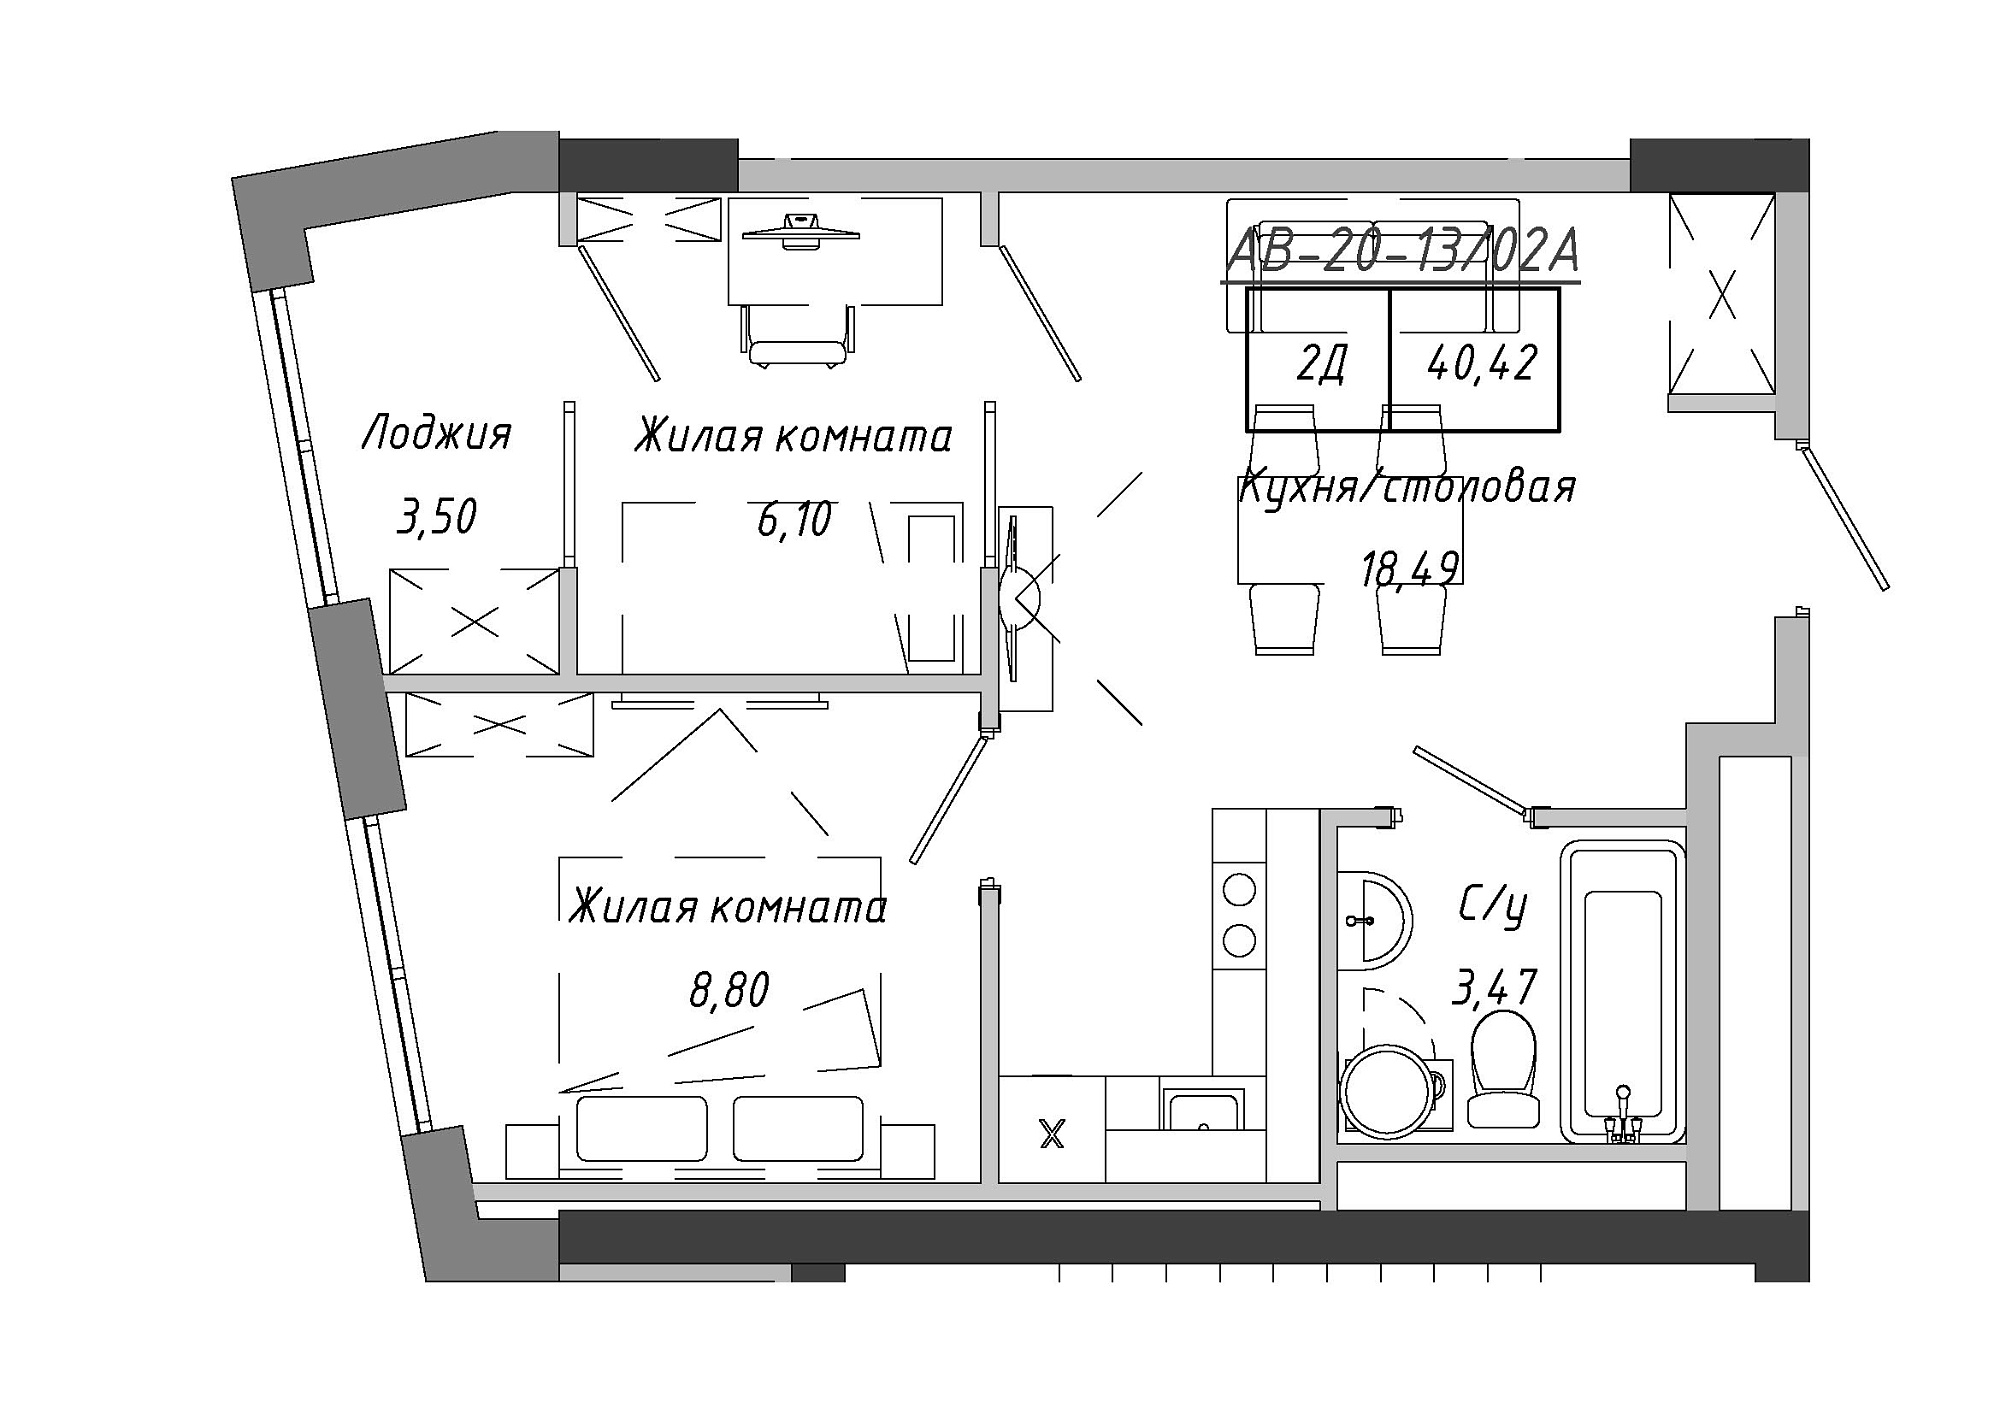 Planning 2-rm flats area 40.42m2, AB-20-13/0102a.